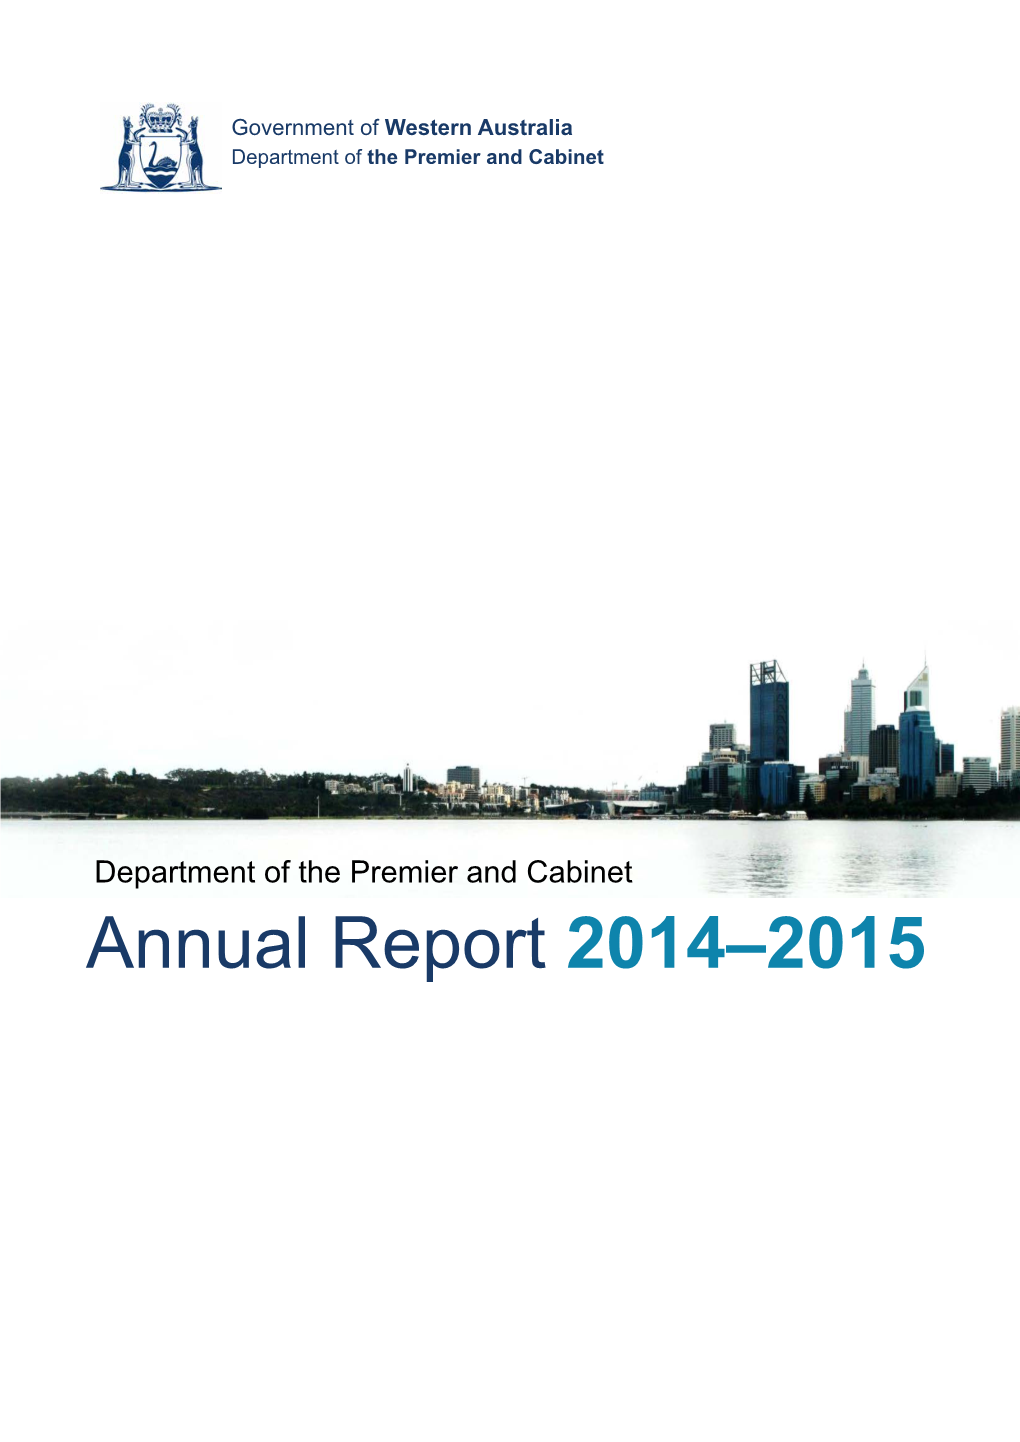 Annual Report 2014–2015 Produced and Published by the Department of the Premier and Cabinet